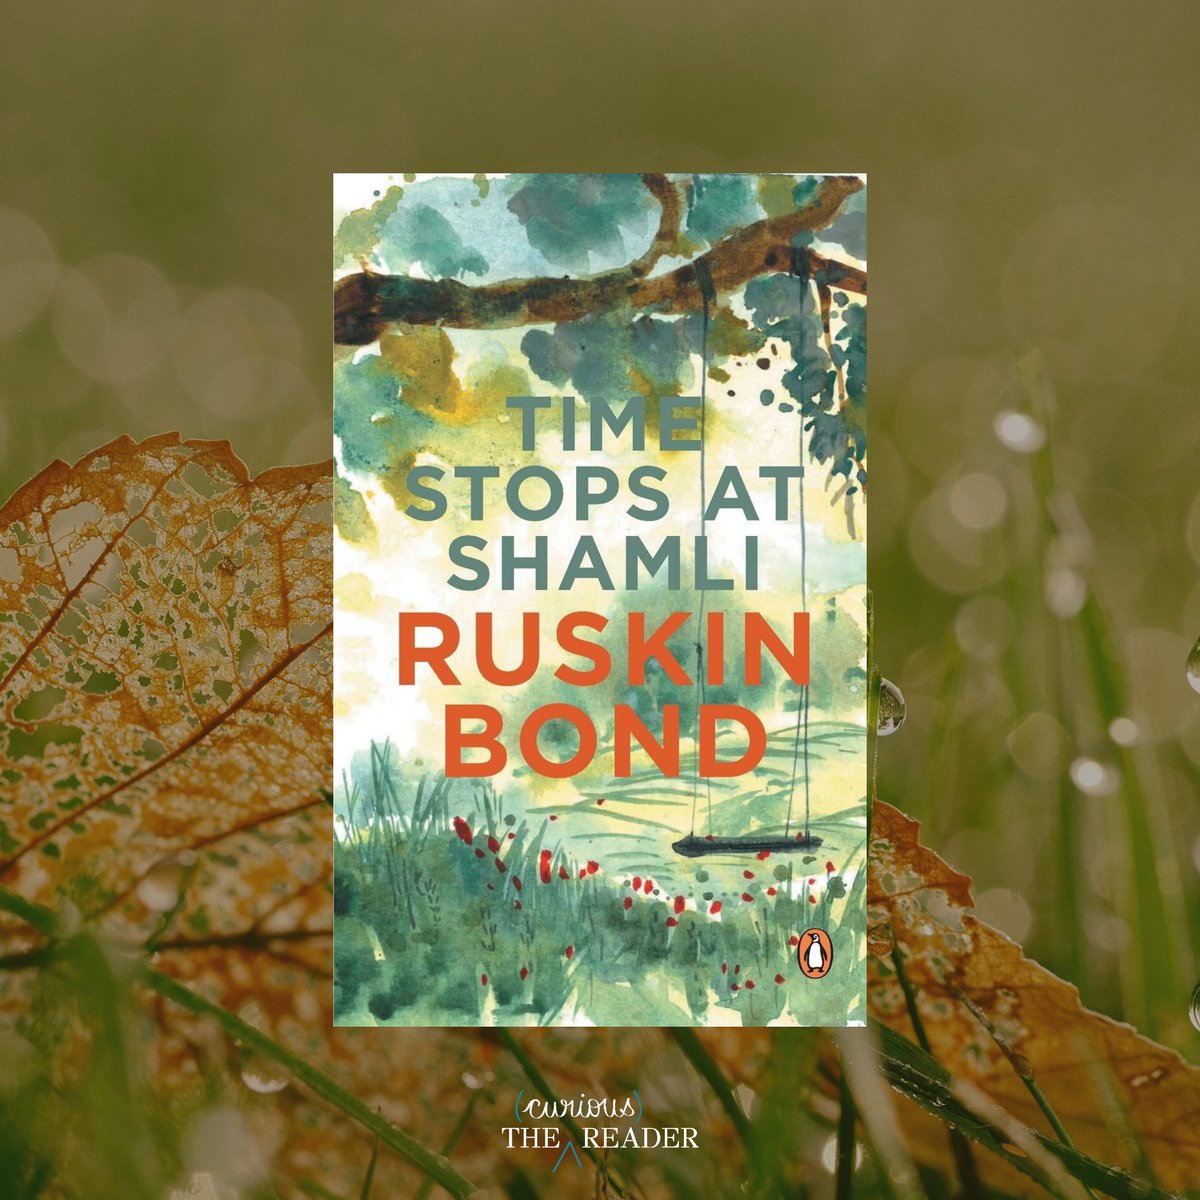 Shubham Reads:Ruskin Bond’s Time Stops At Shamli captures the simple pleasures of small towns. Ruskin takes a chance and gets down at Shamli and in short borrowed time, he finds his lost love. The book is for the romantic in me as I read it on my balcony with a cup of coffee.